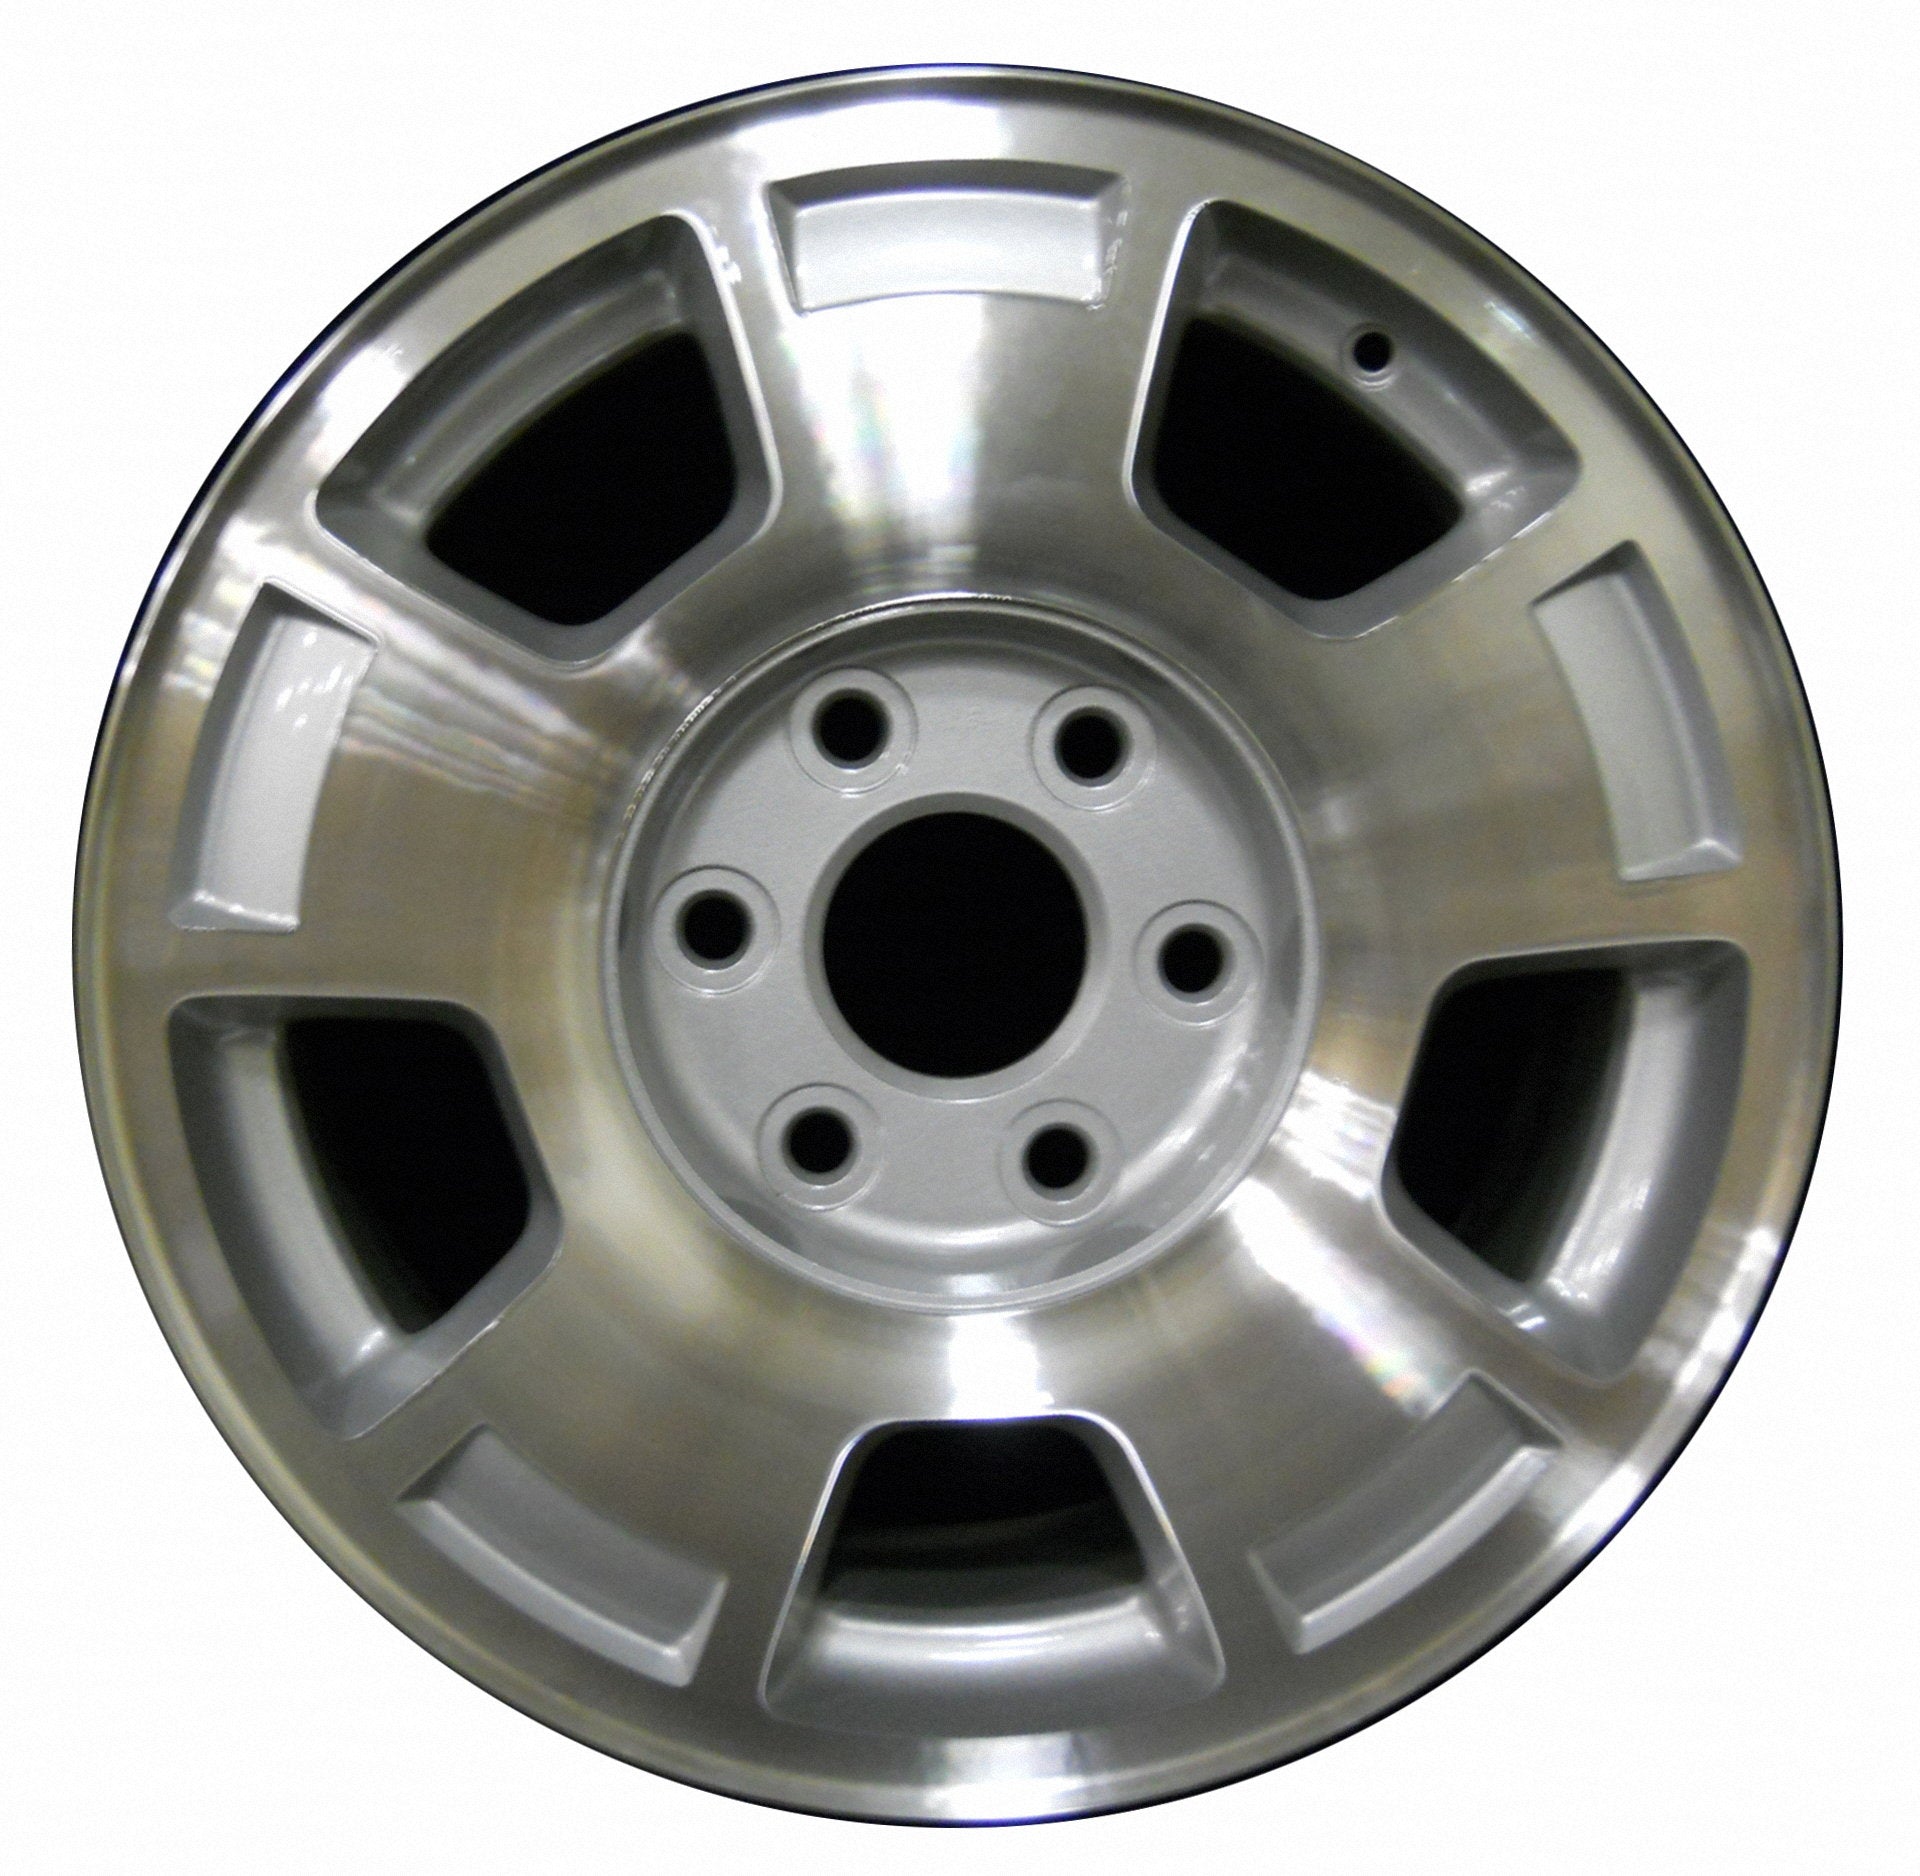 Chevrolet Avalanche  2005, 2006, 2007, 2008, 2009, 2010, 2011, 2012, 2013, 2014 Factory OEM Car Wheel Size 17x7.5 Alloy WAO.5299.PS02.MA